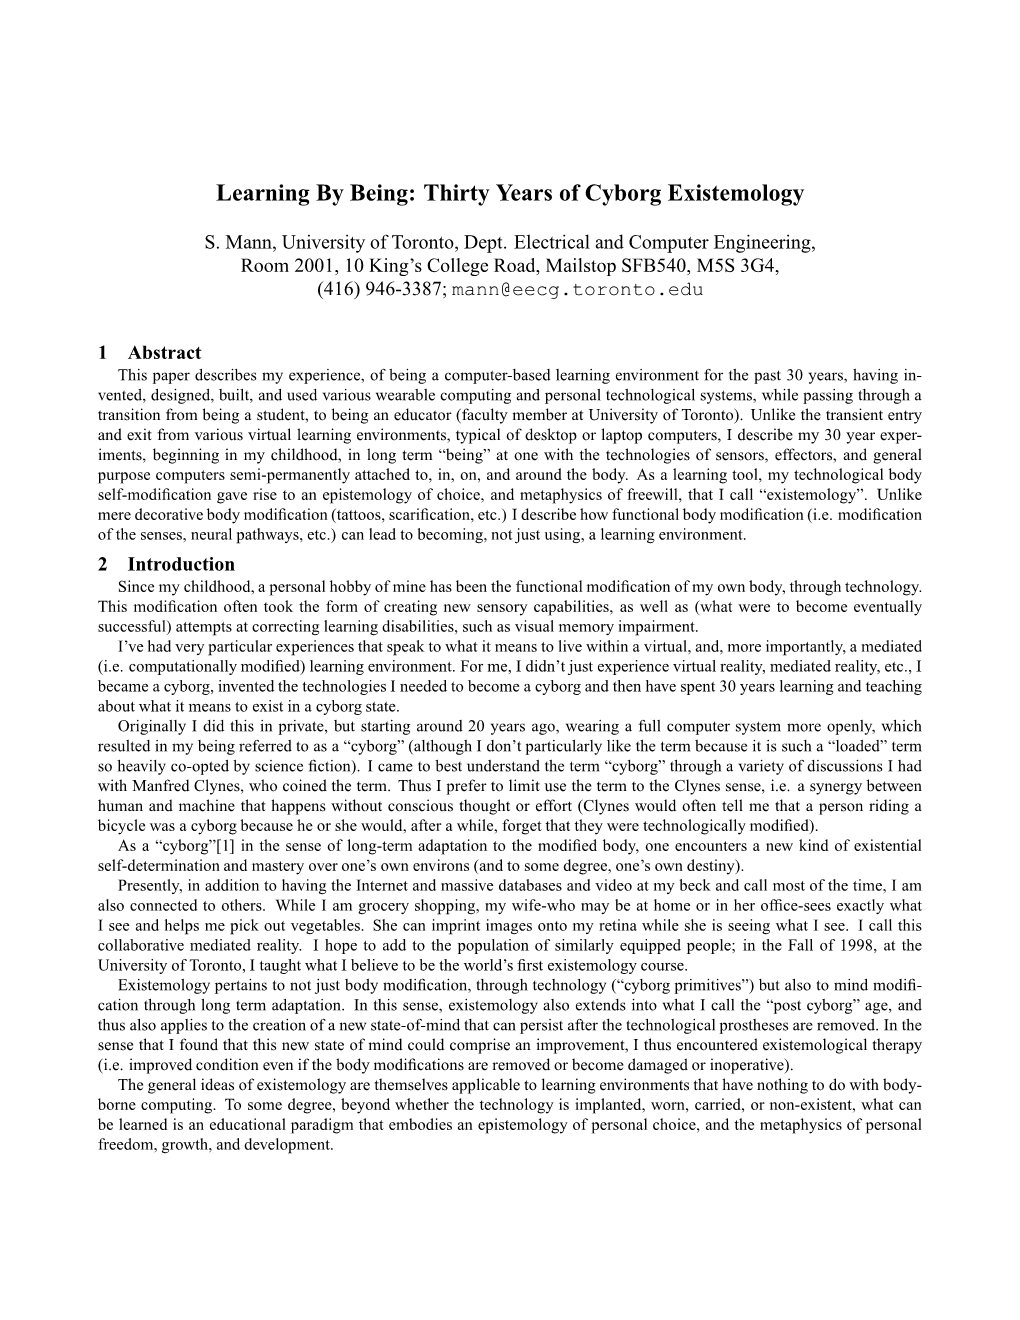 Learning by Being: Thirty Years of Cyborg Existemology